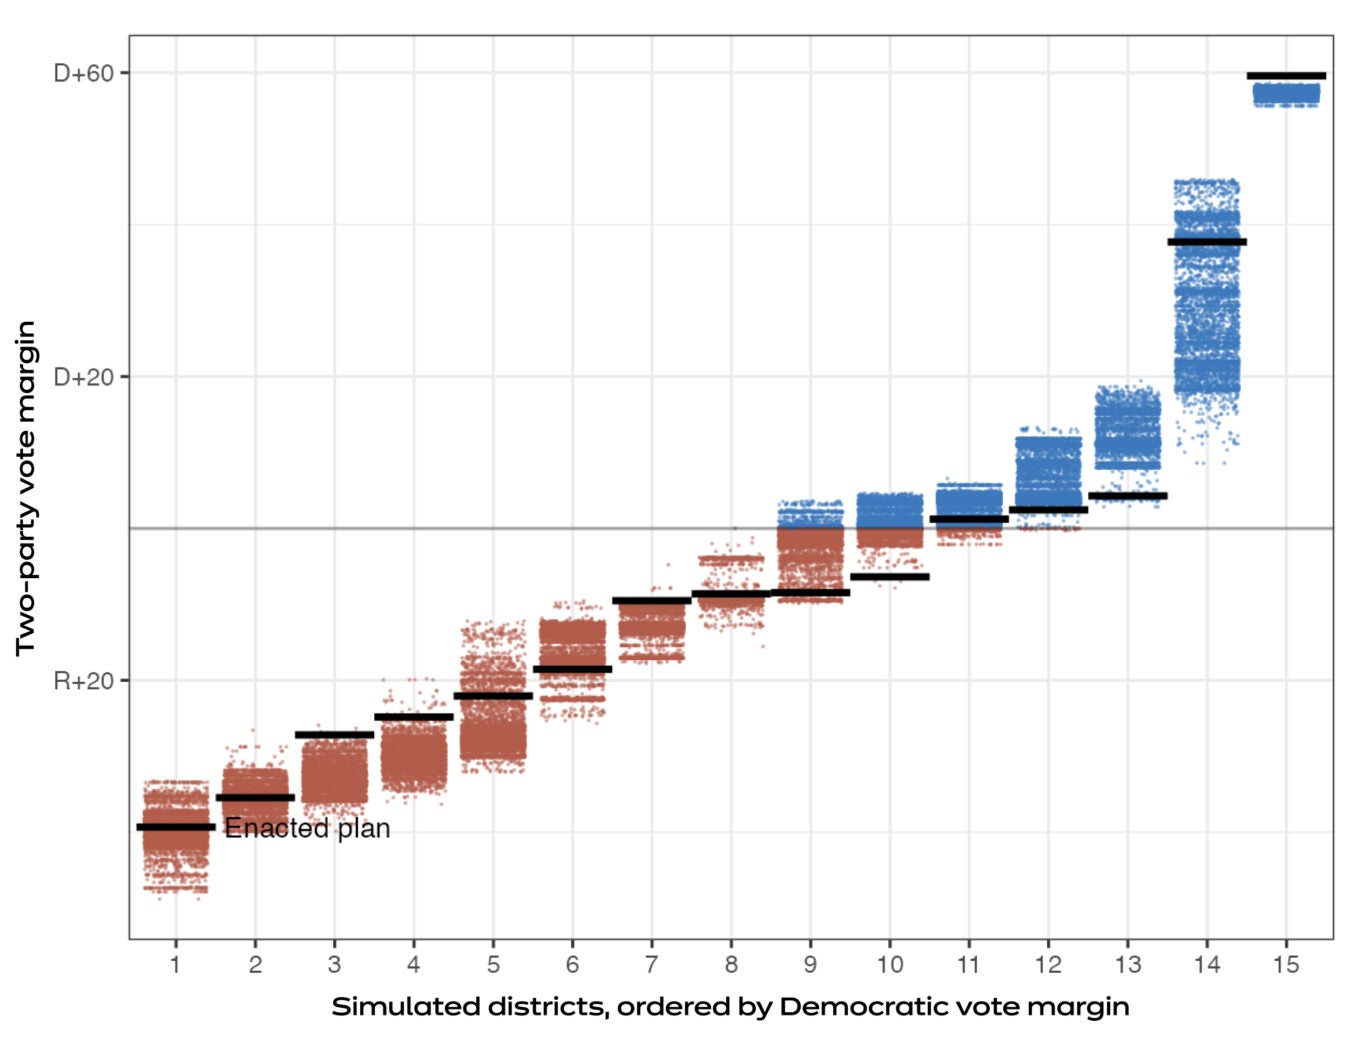 Graph compares vote margins of each district of the enacted plan to the set of simulated districts.